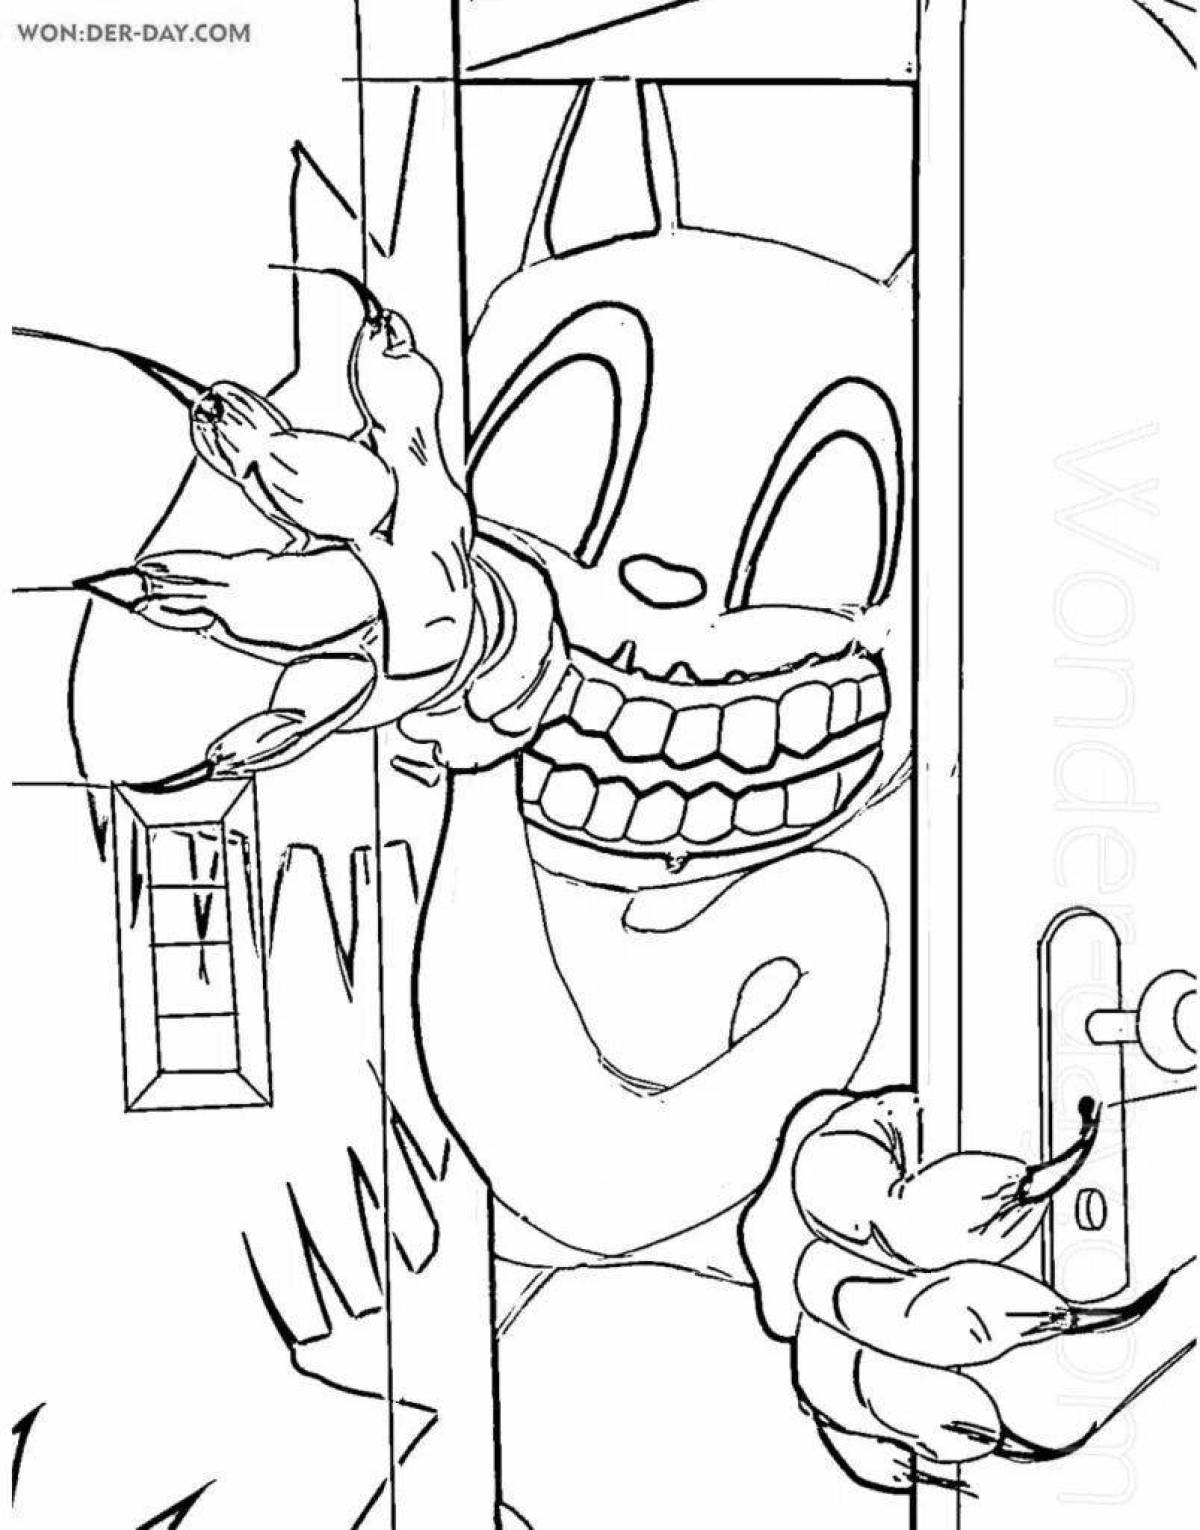 Terrible gray cat coloring page